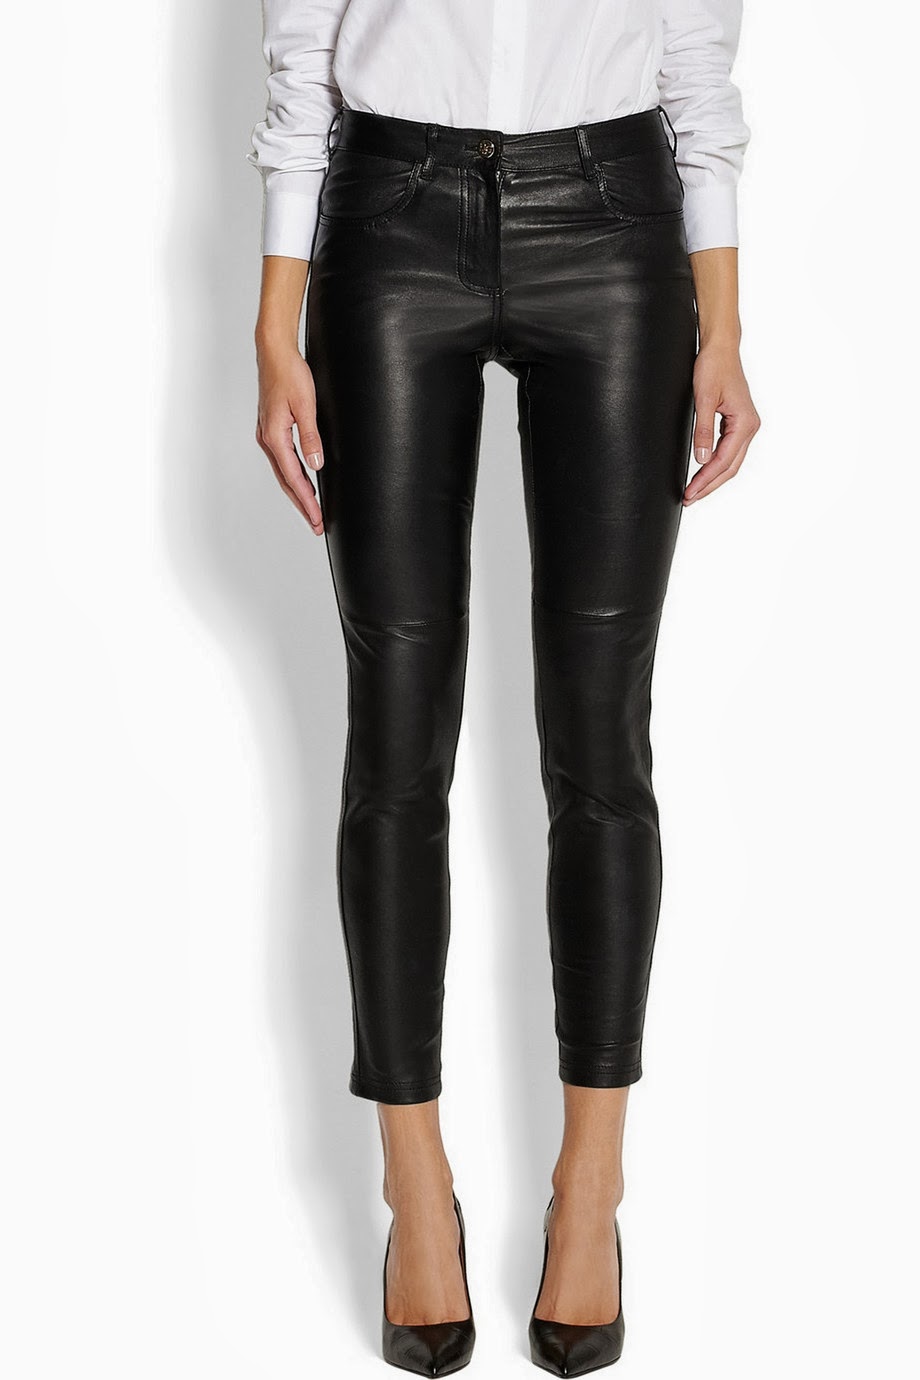 Leather Pants - Obsession - Provocative Woman